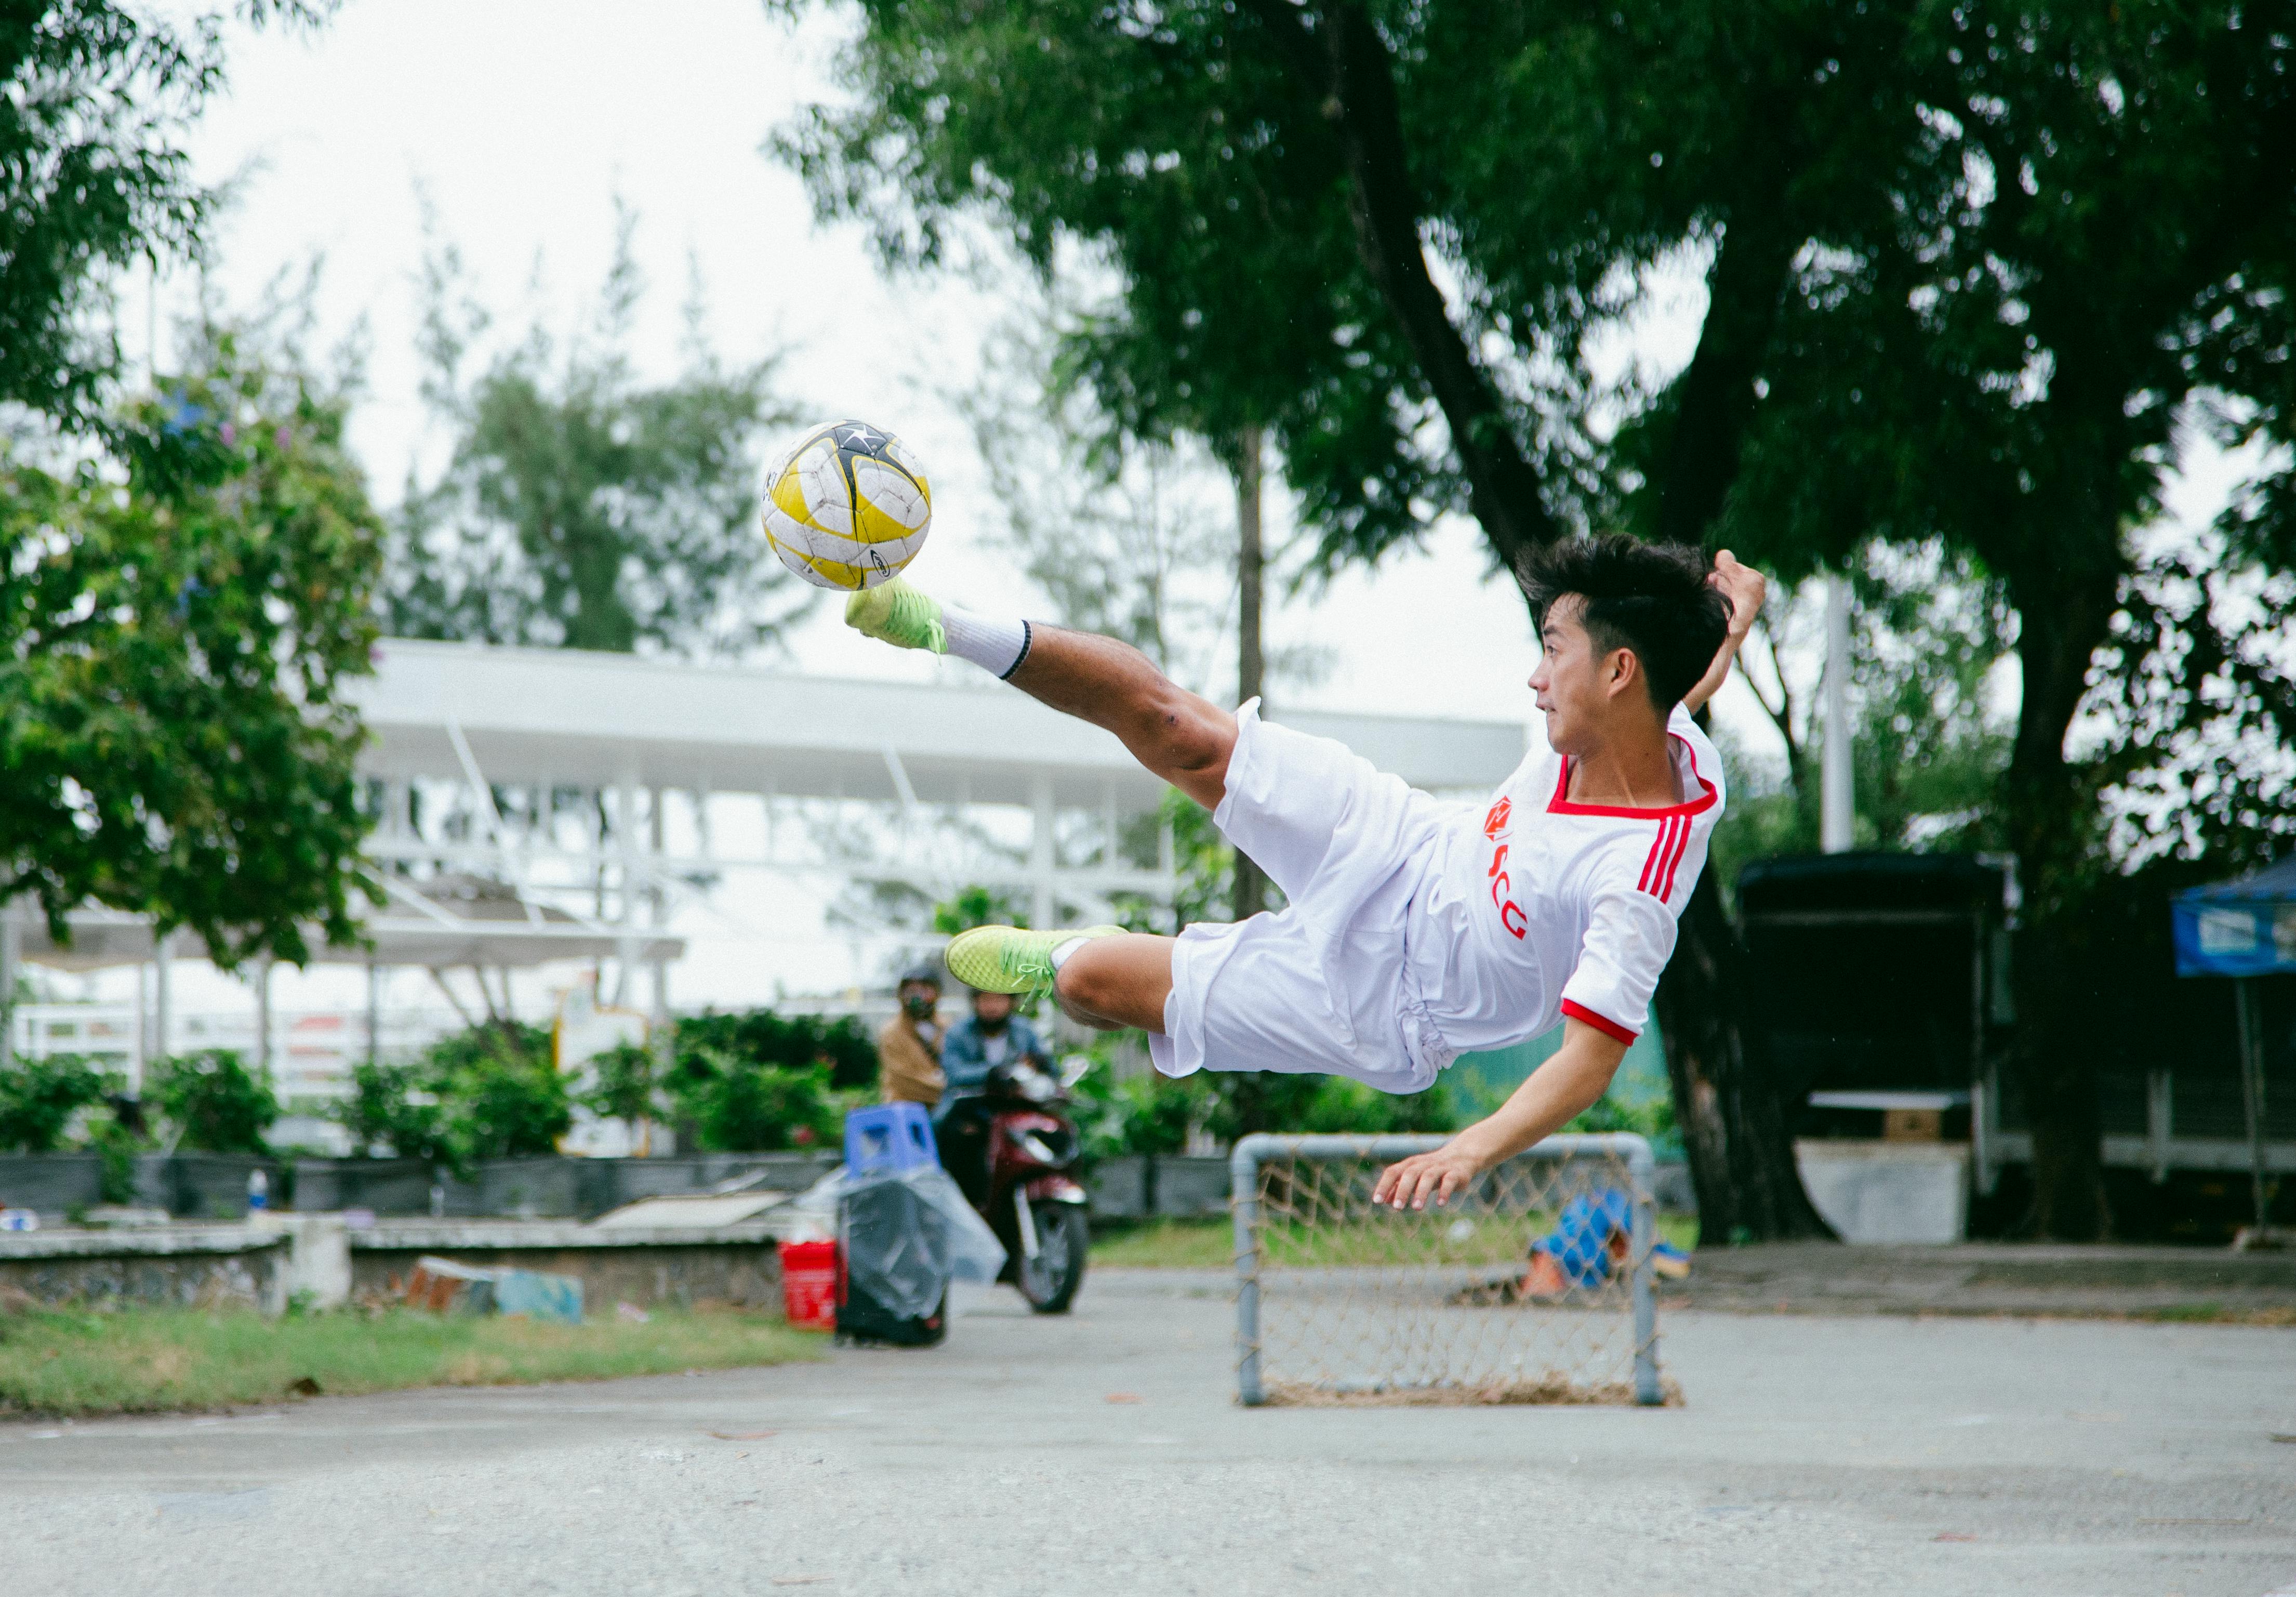 time lapse photography of soccer player jumping kicking ball